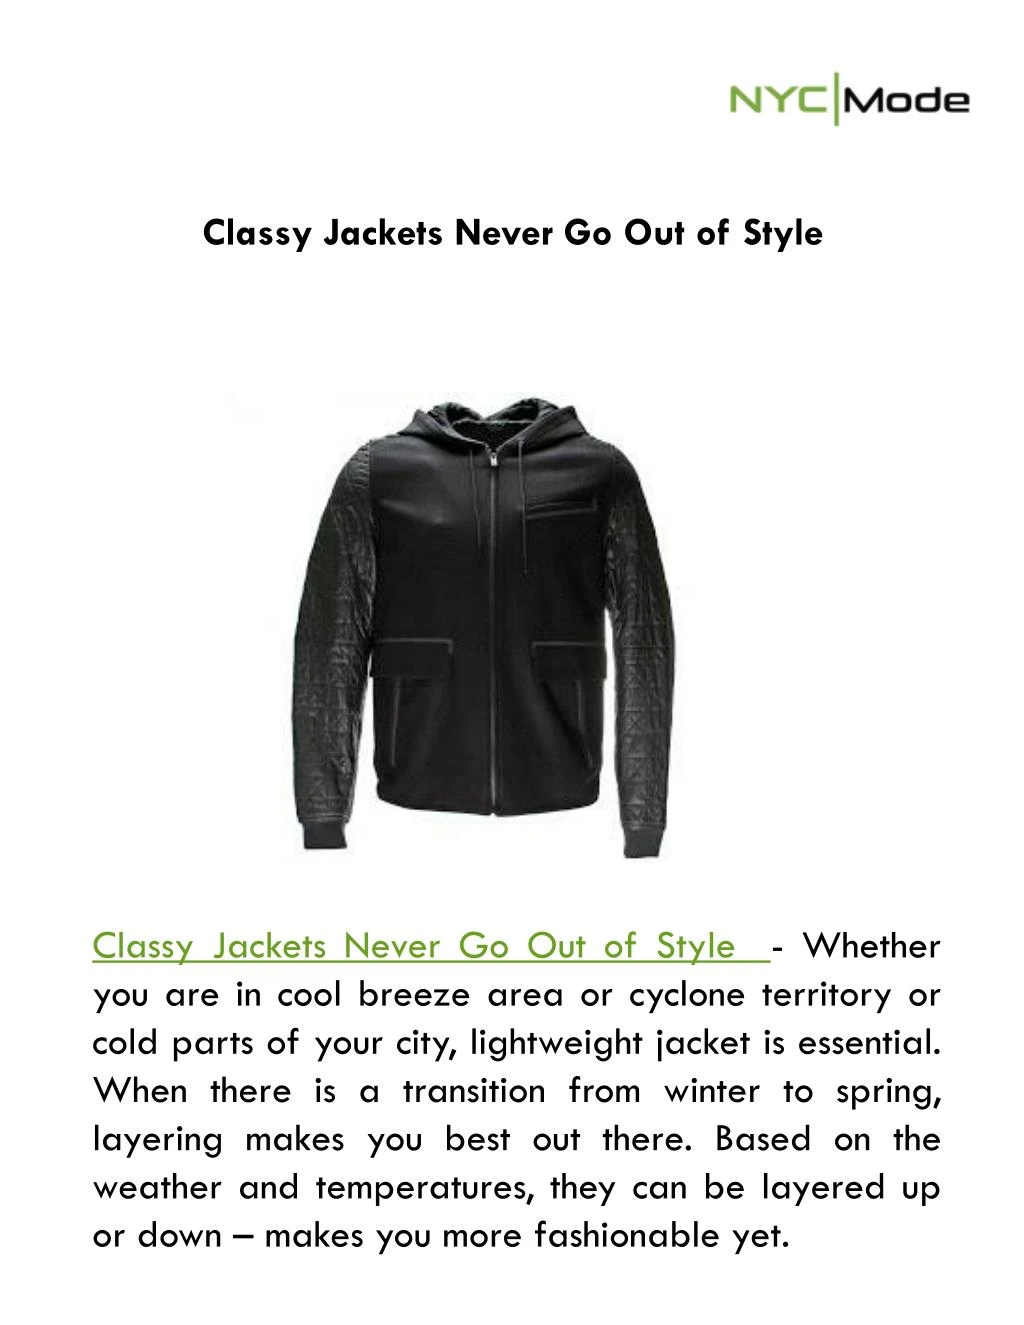 classy jackets never go out of style